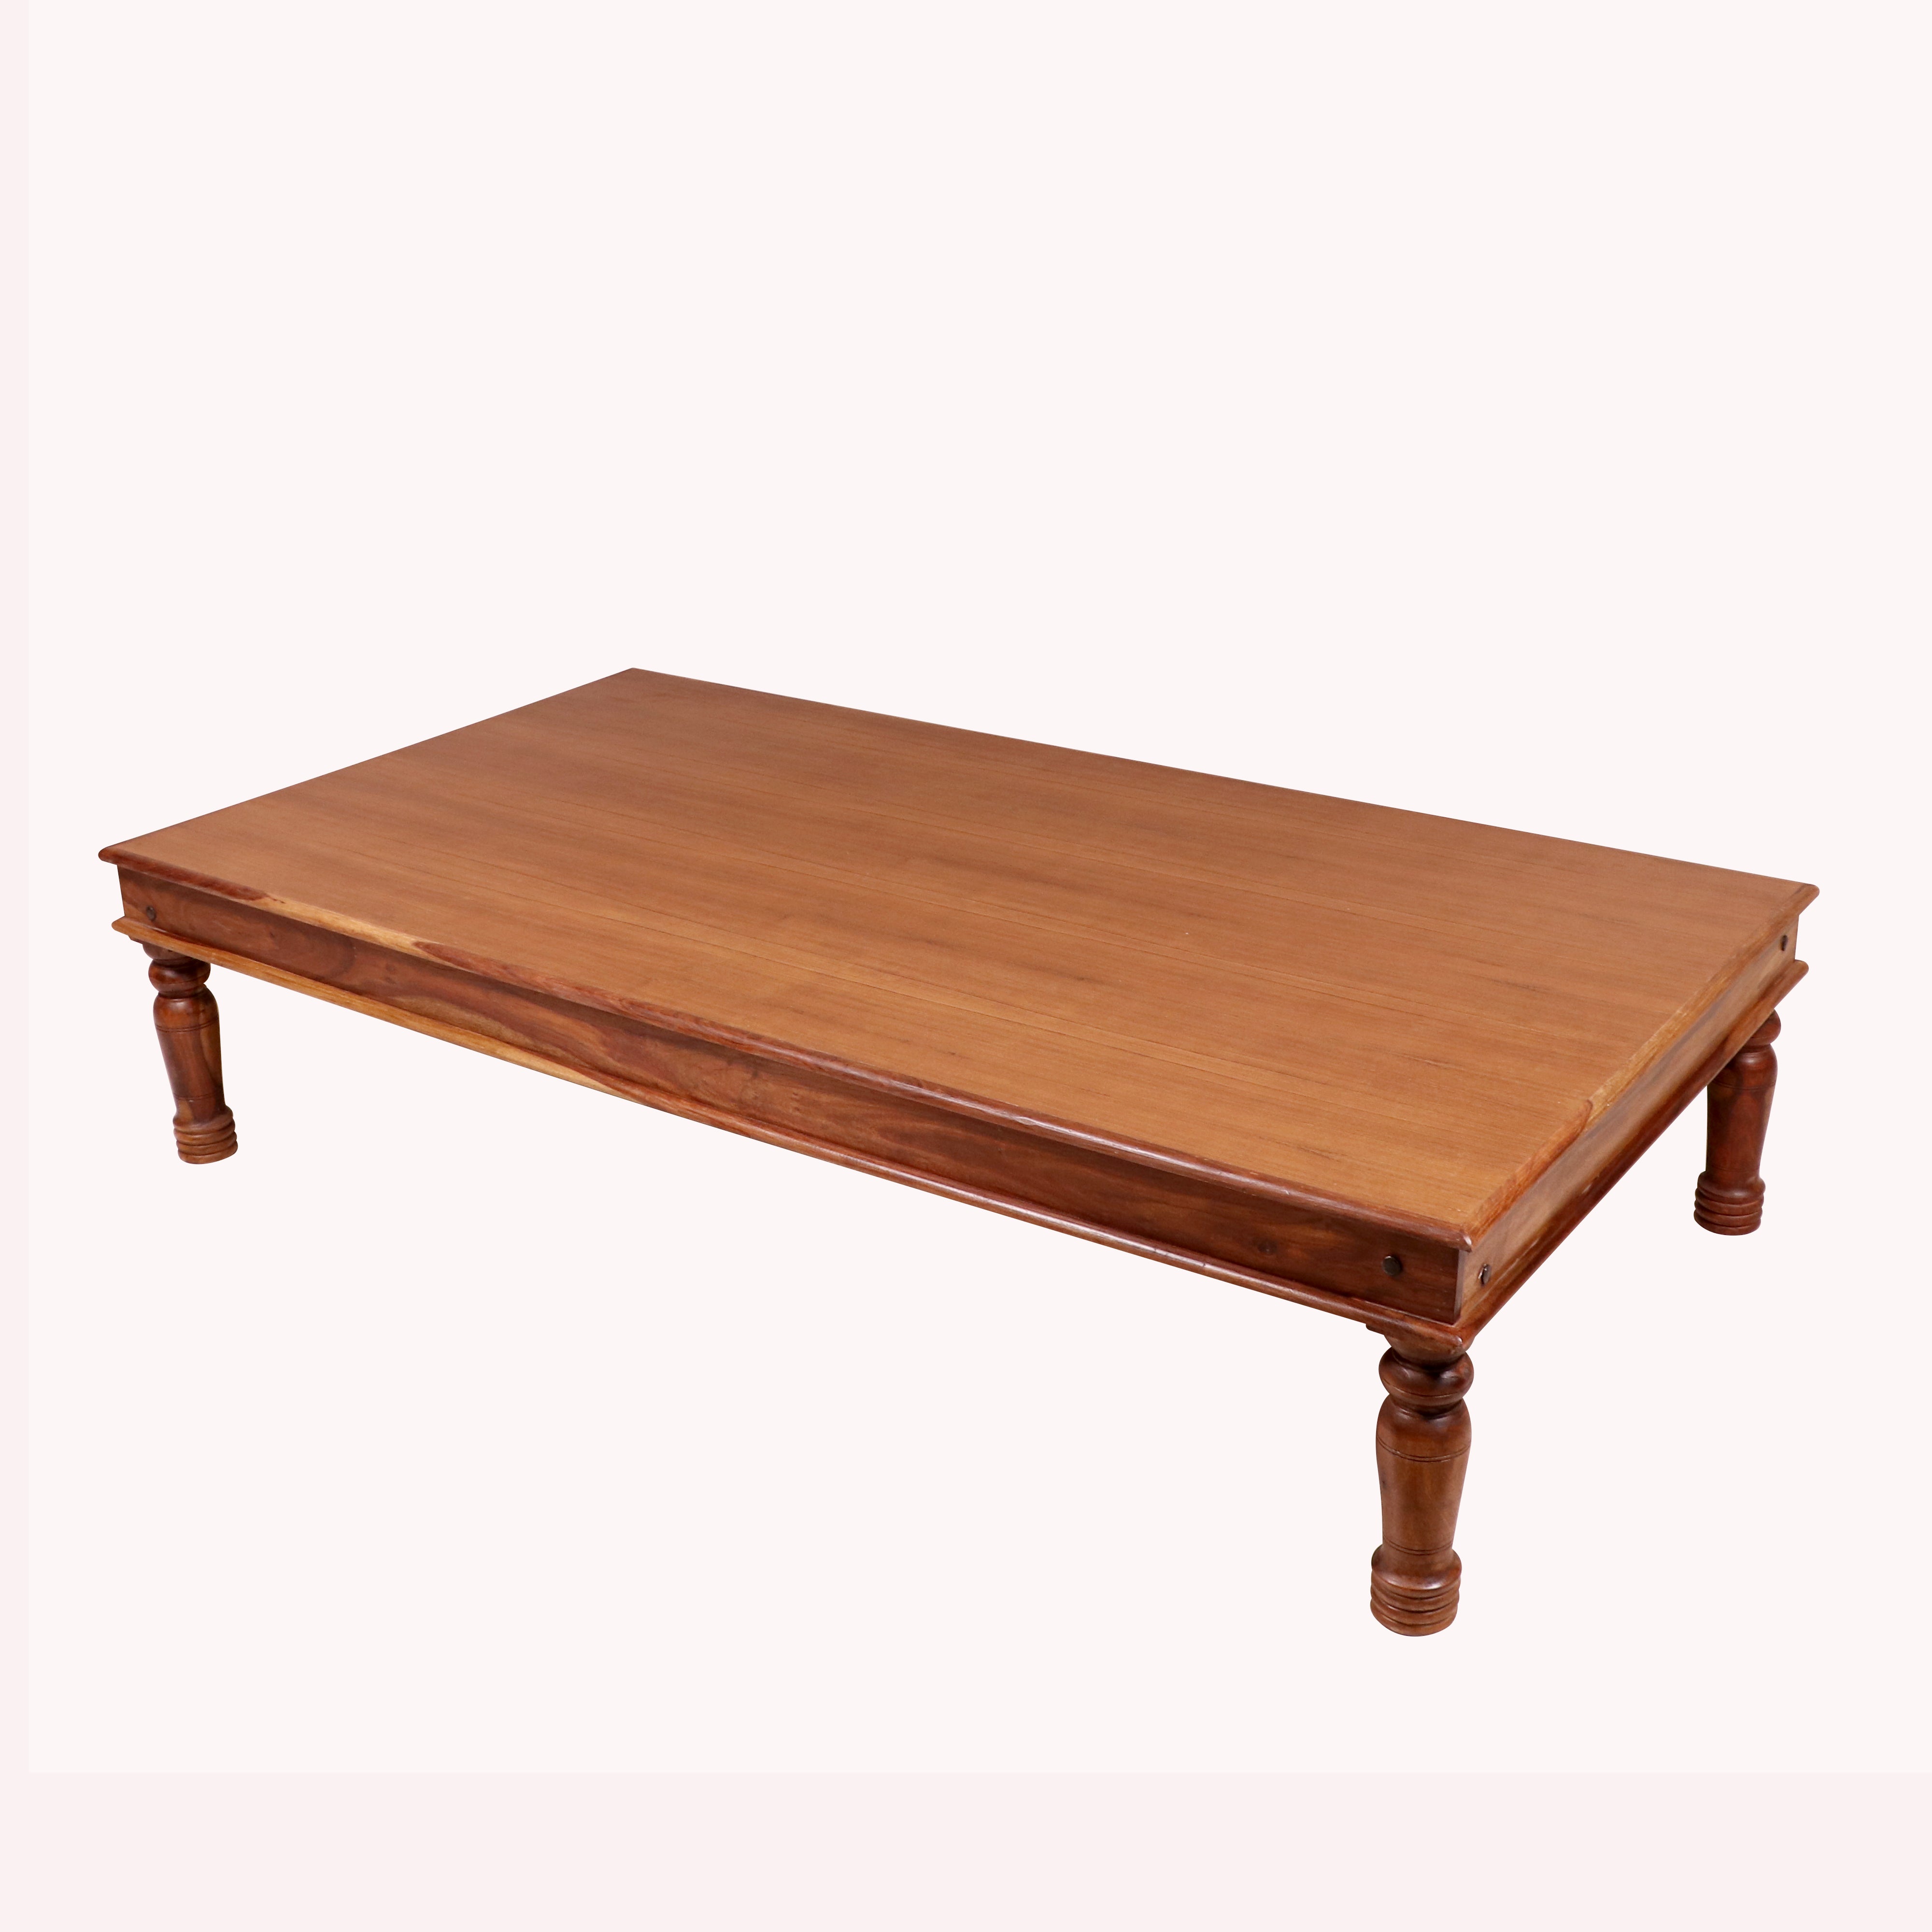 Sheesham wood Round legs with veneer Classical indian Paat Daybed